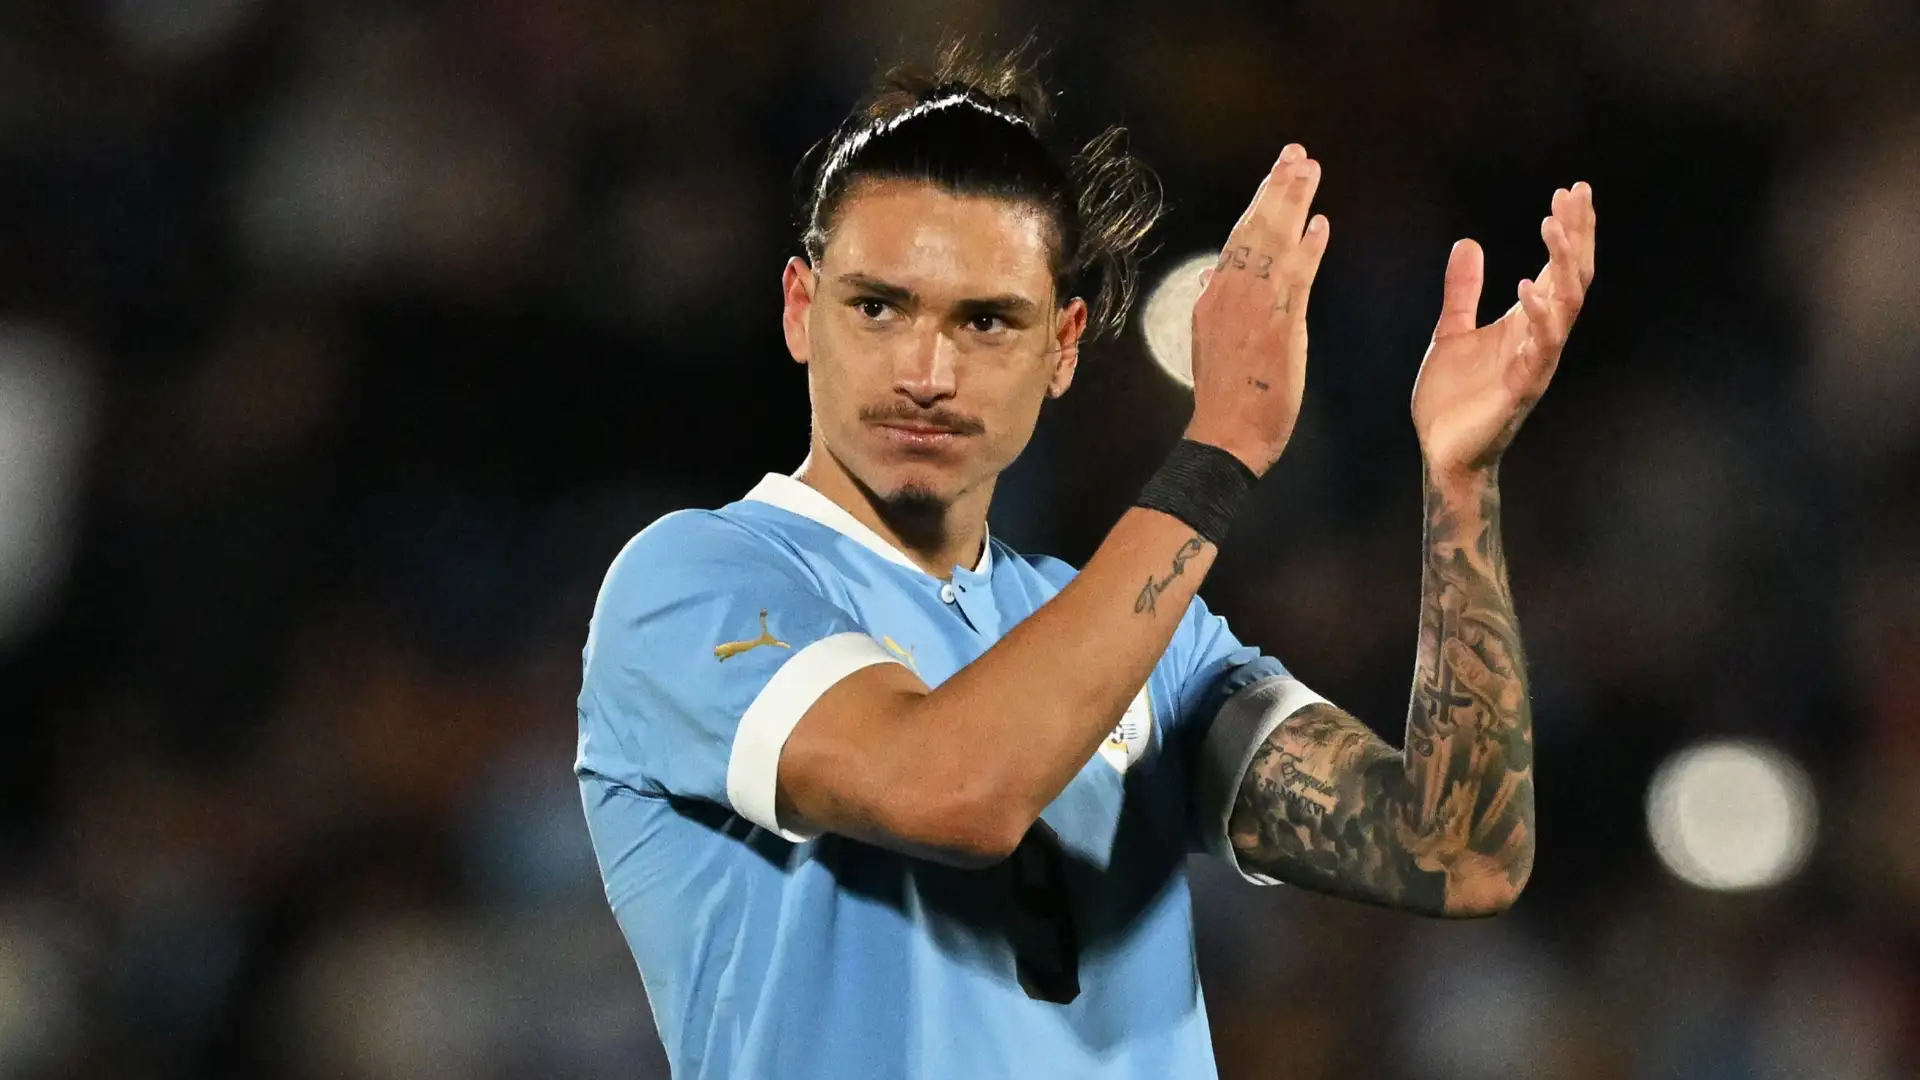 'Captain Chaos' at the Copa America: Darwin Nunez out to prove he can lead Uruguay into a new era